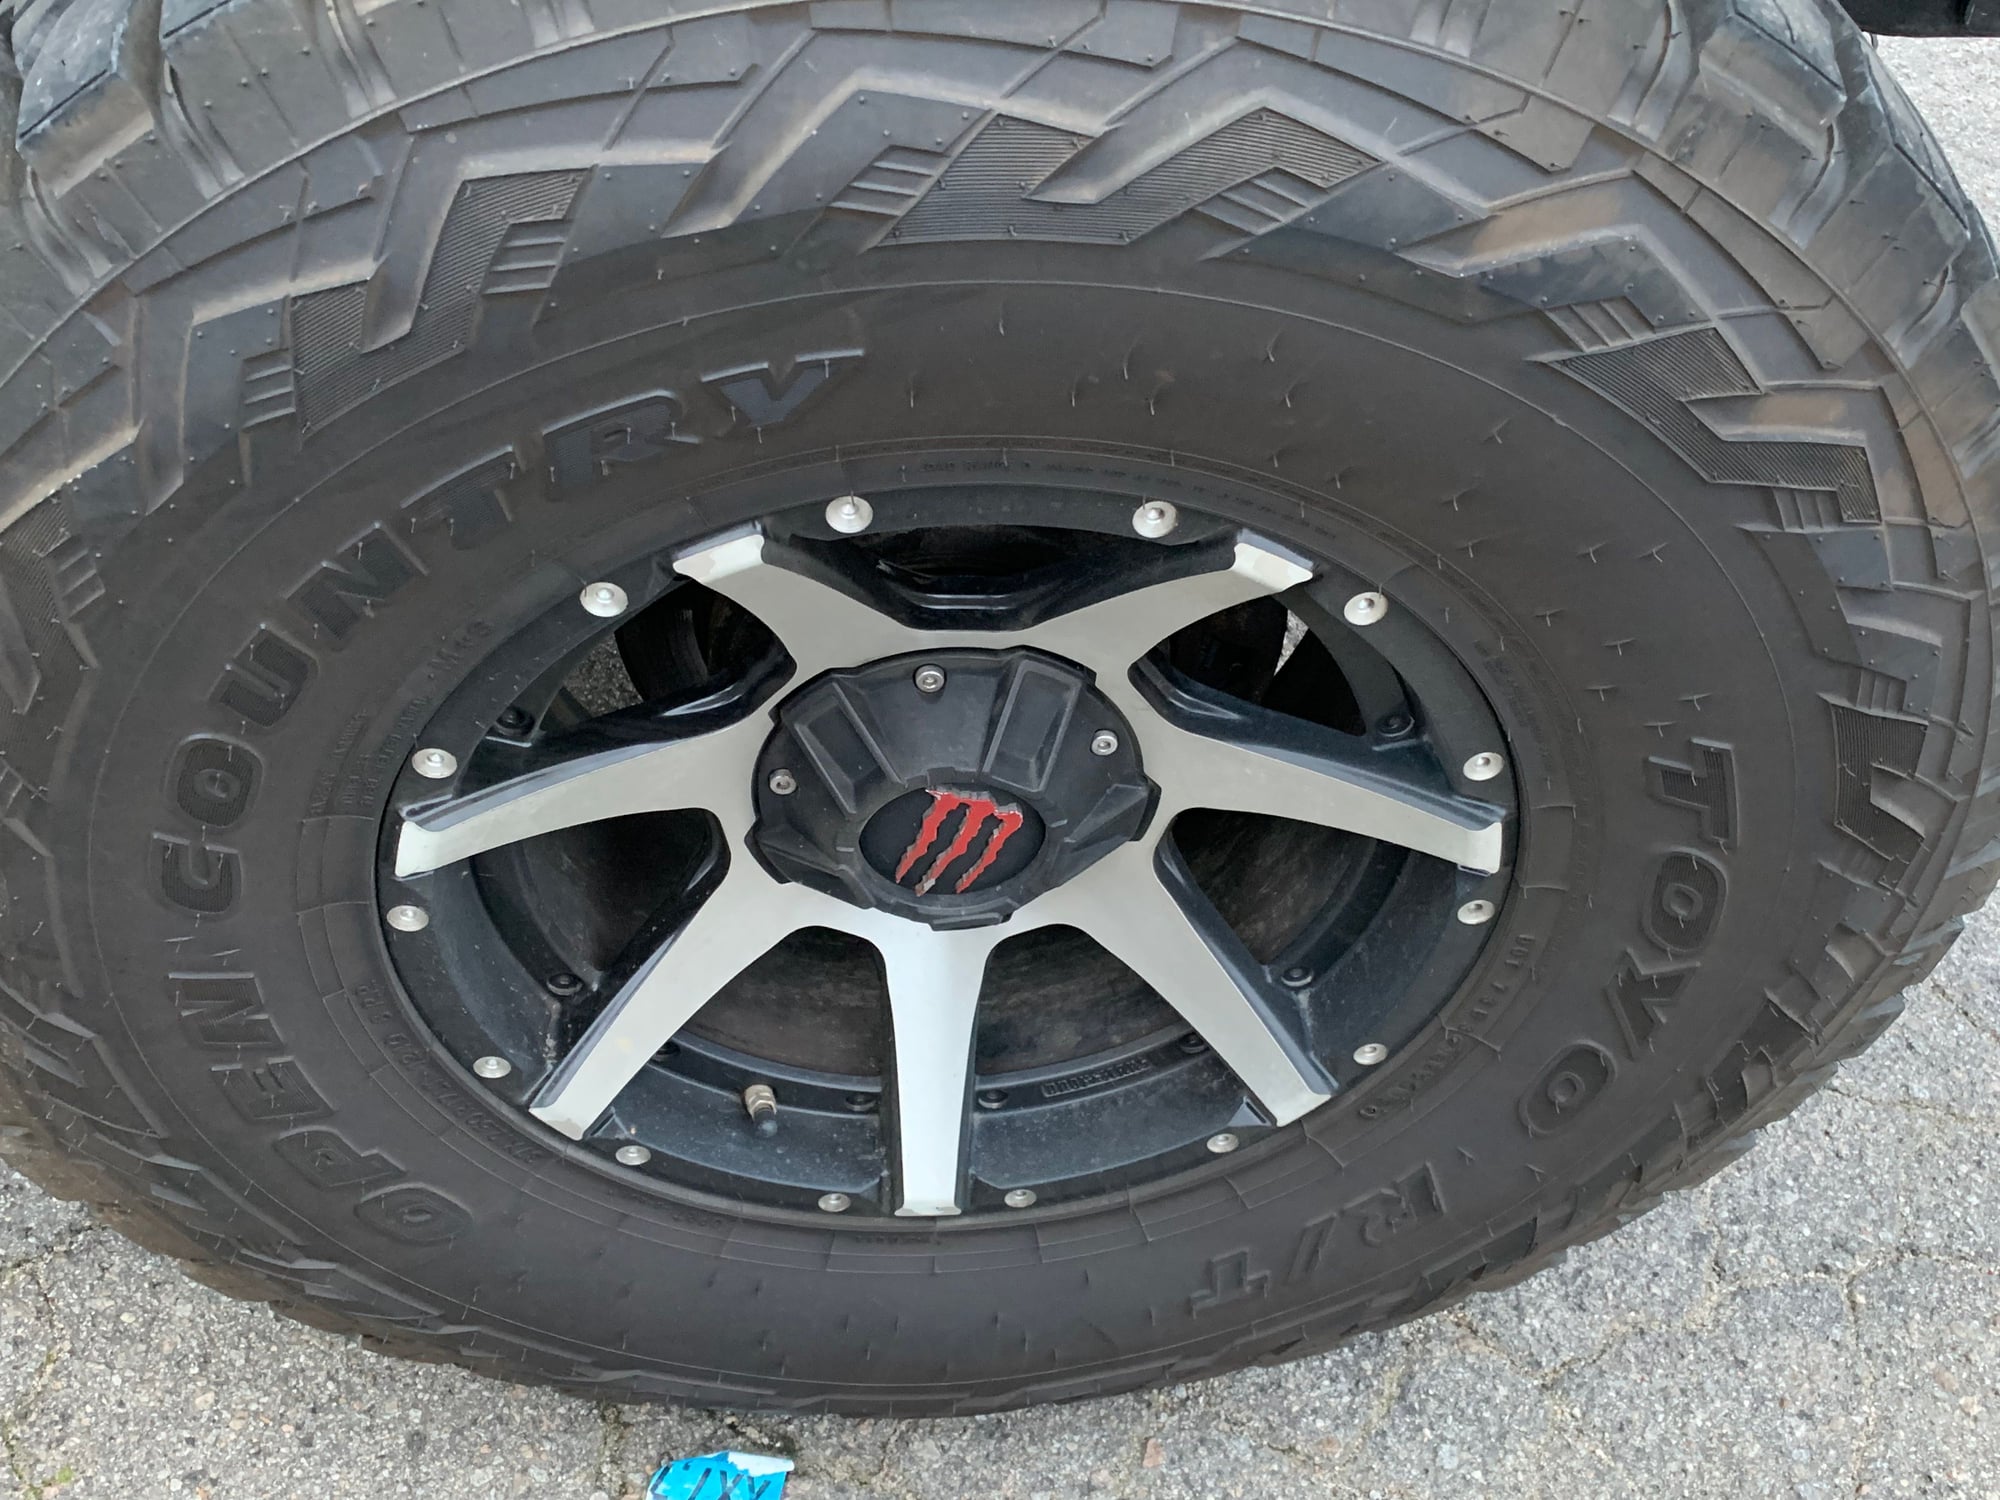 Wheels and Tires/Axles - 36/12.50R17 Toyo Open Country Rt tires - Used - Columbia, SC 29210, United States